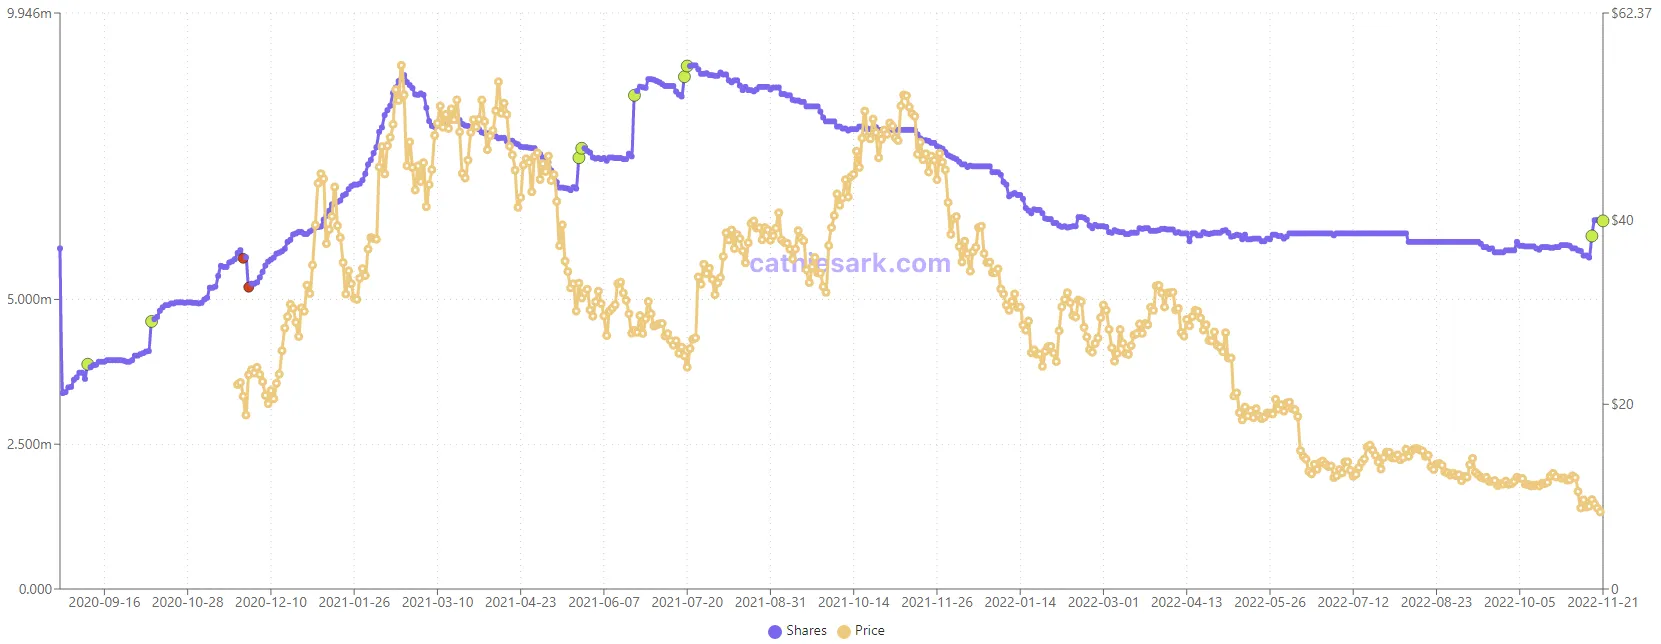 A purple and a gold line showing the value of two metrics. 